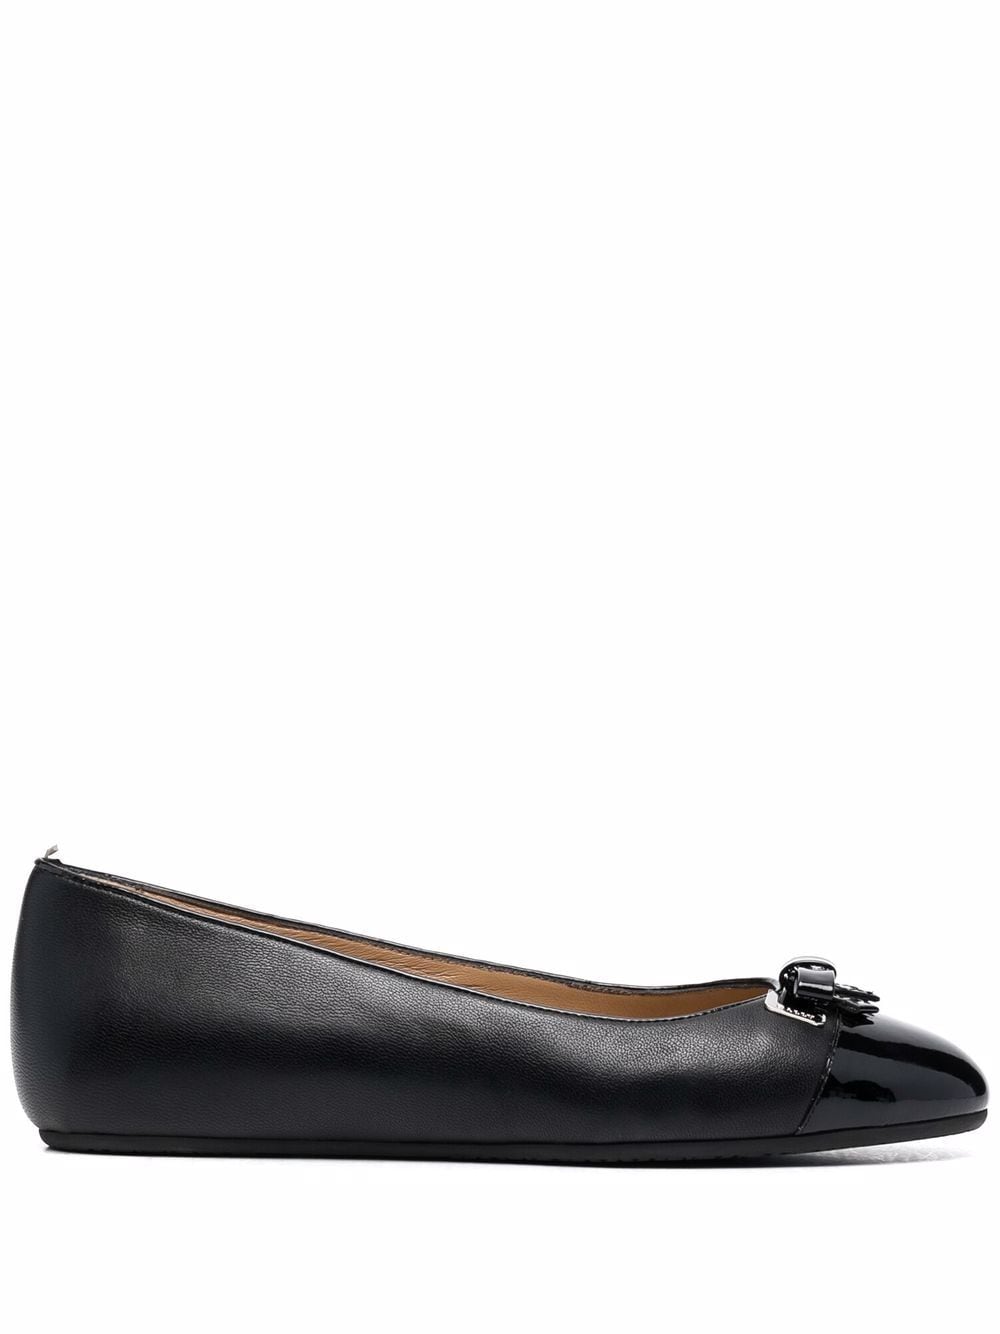 Image 1 of Bally bow-detail leather ballerina shoes